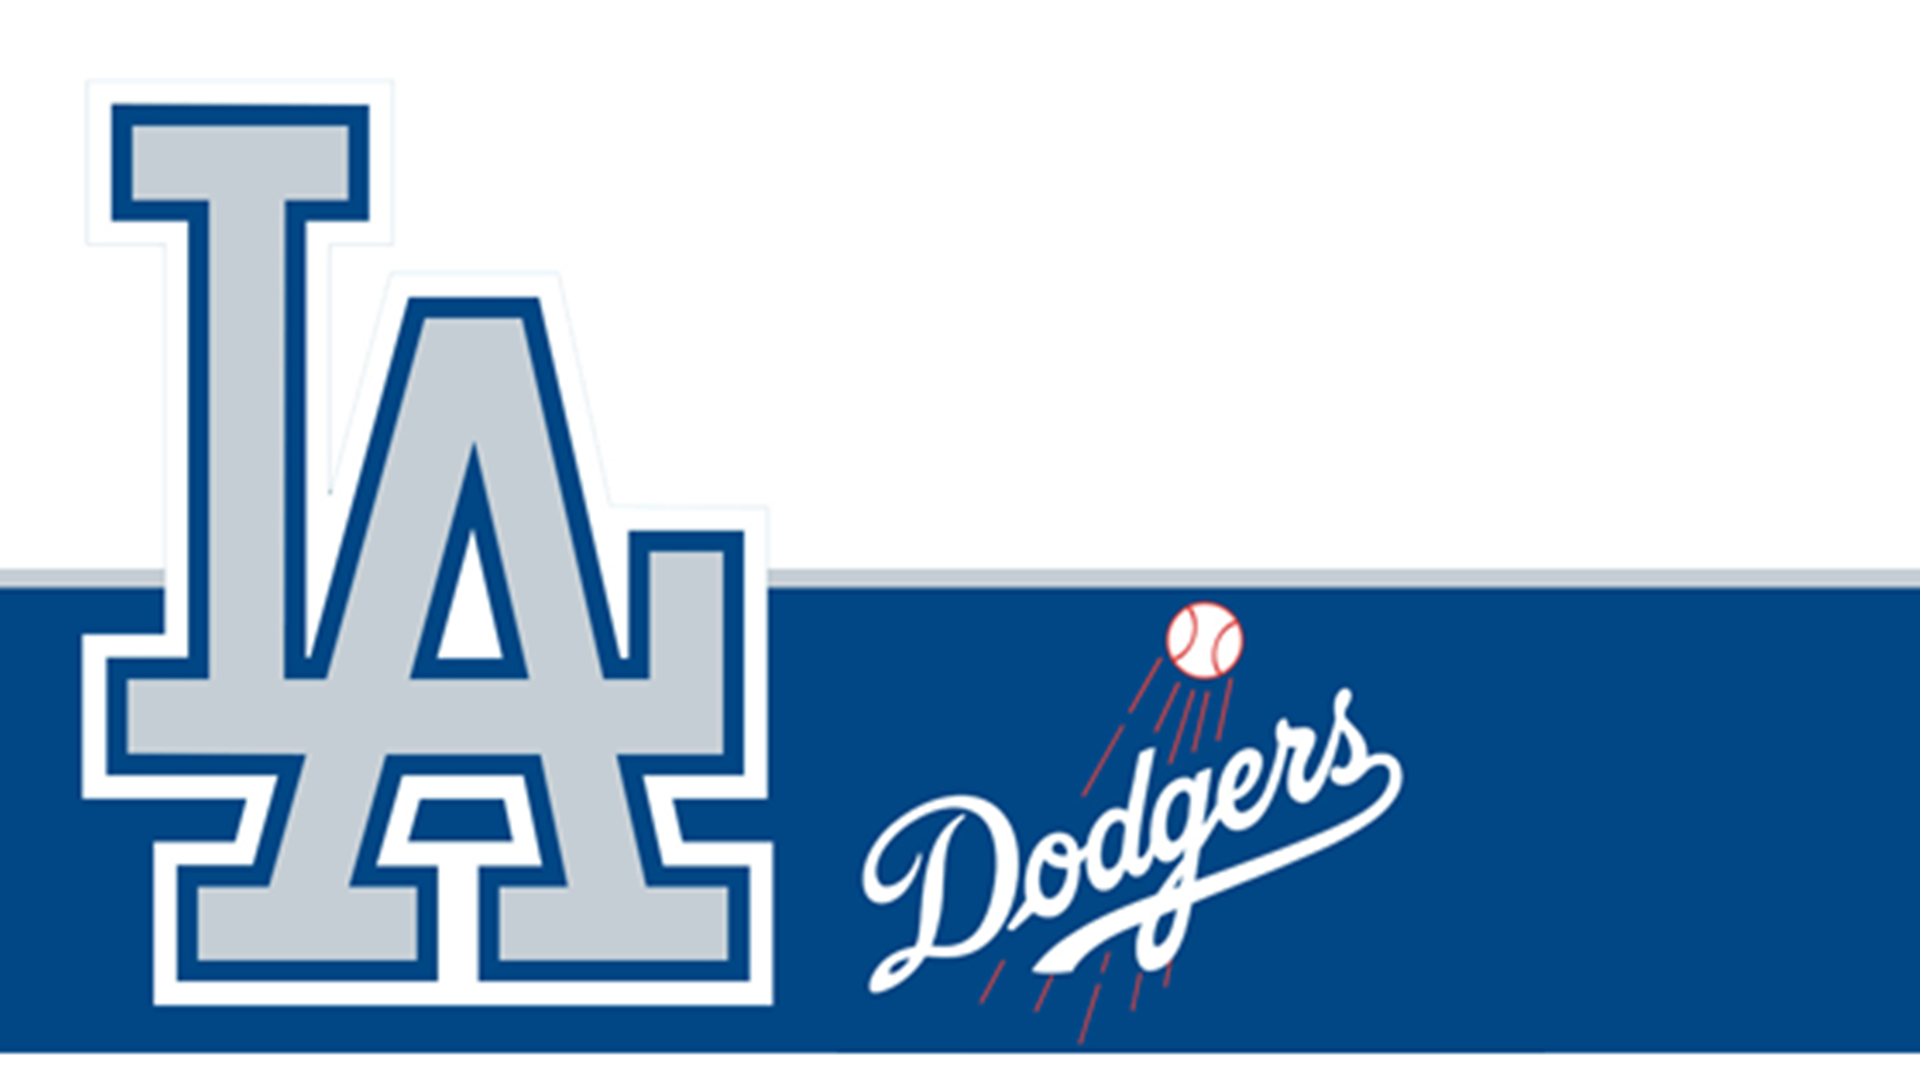 Dodgers Backgrounds